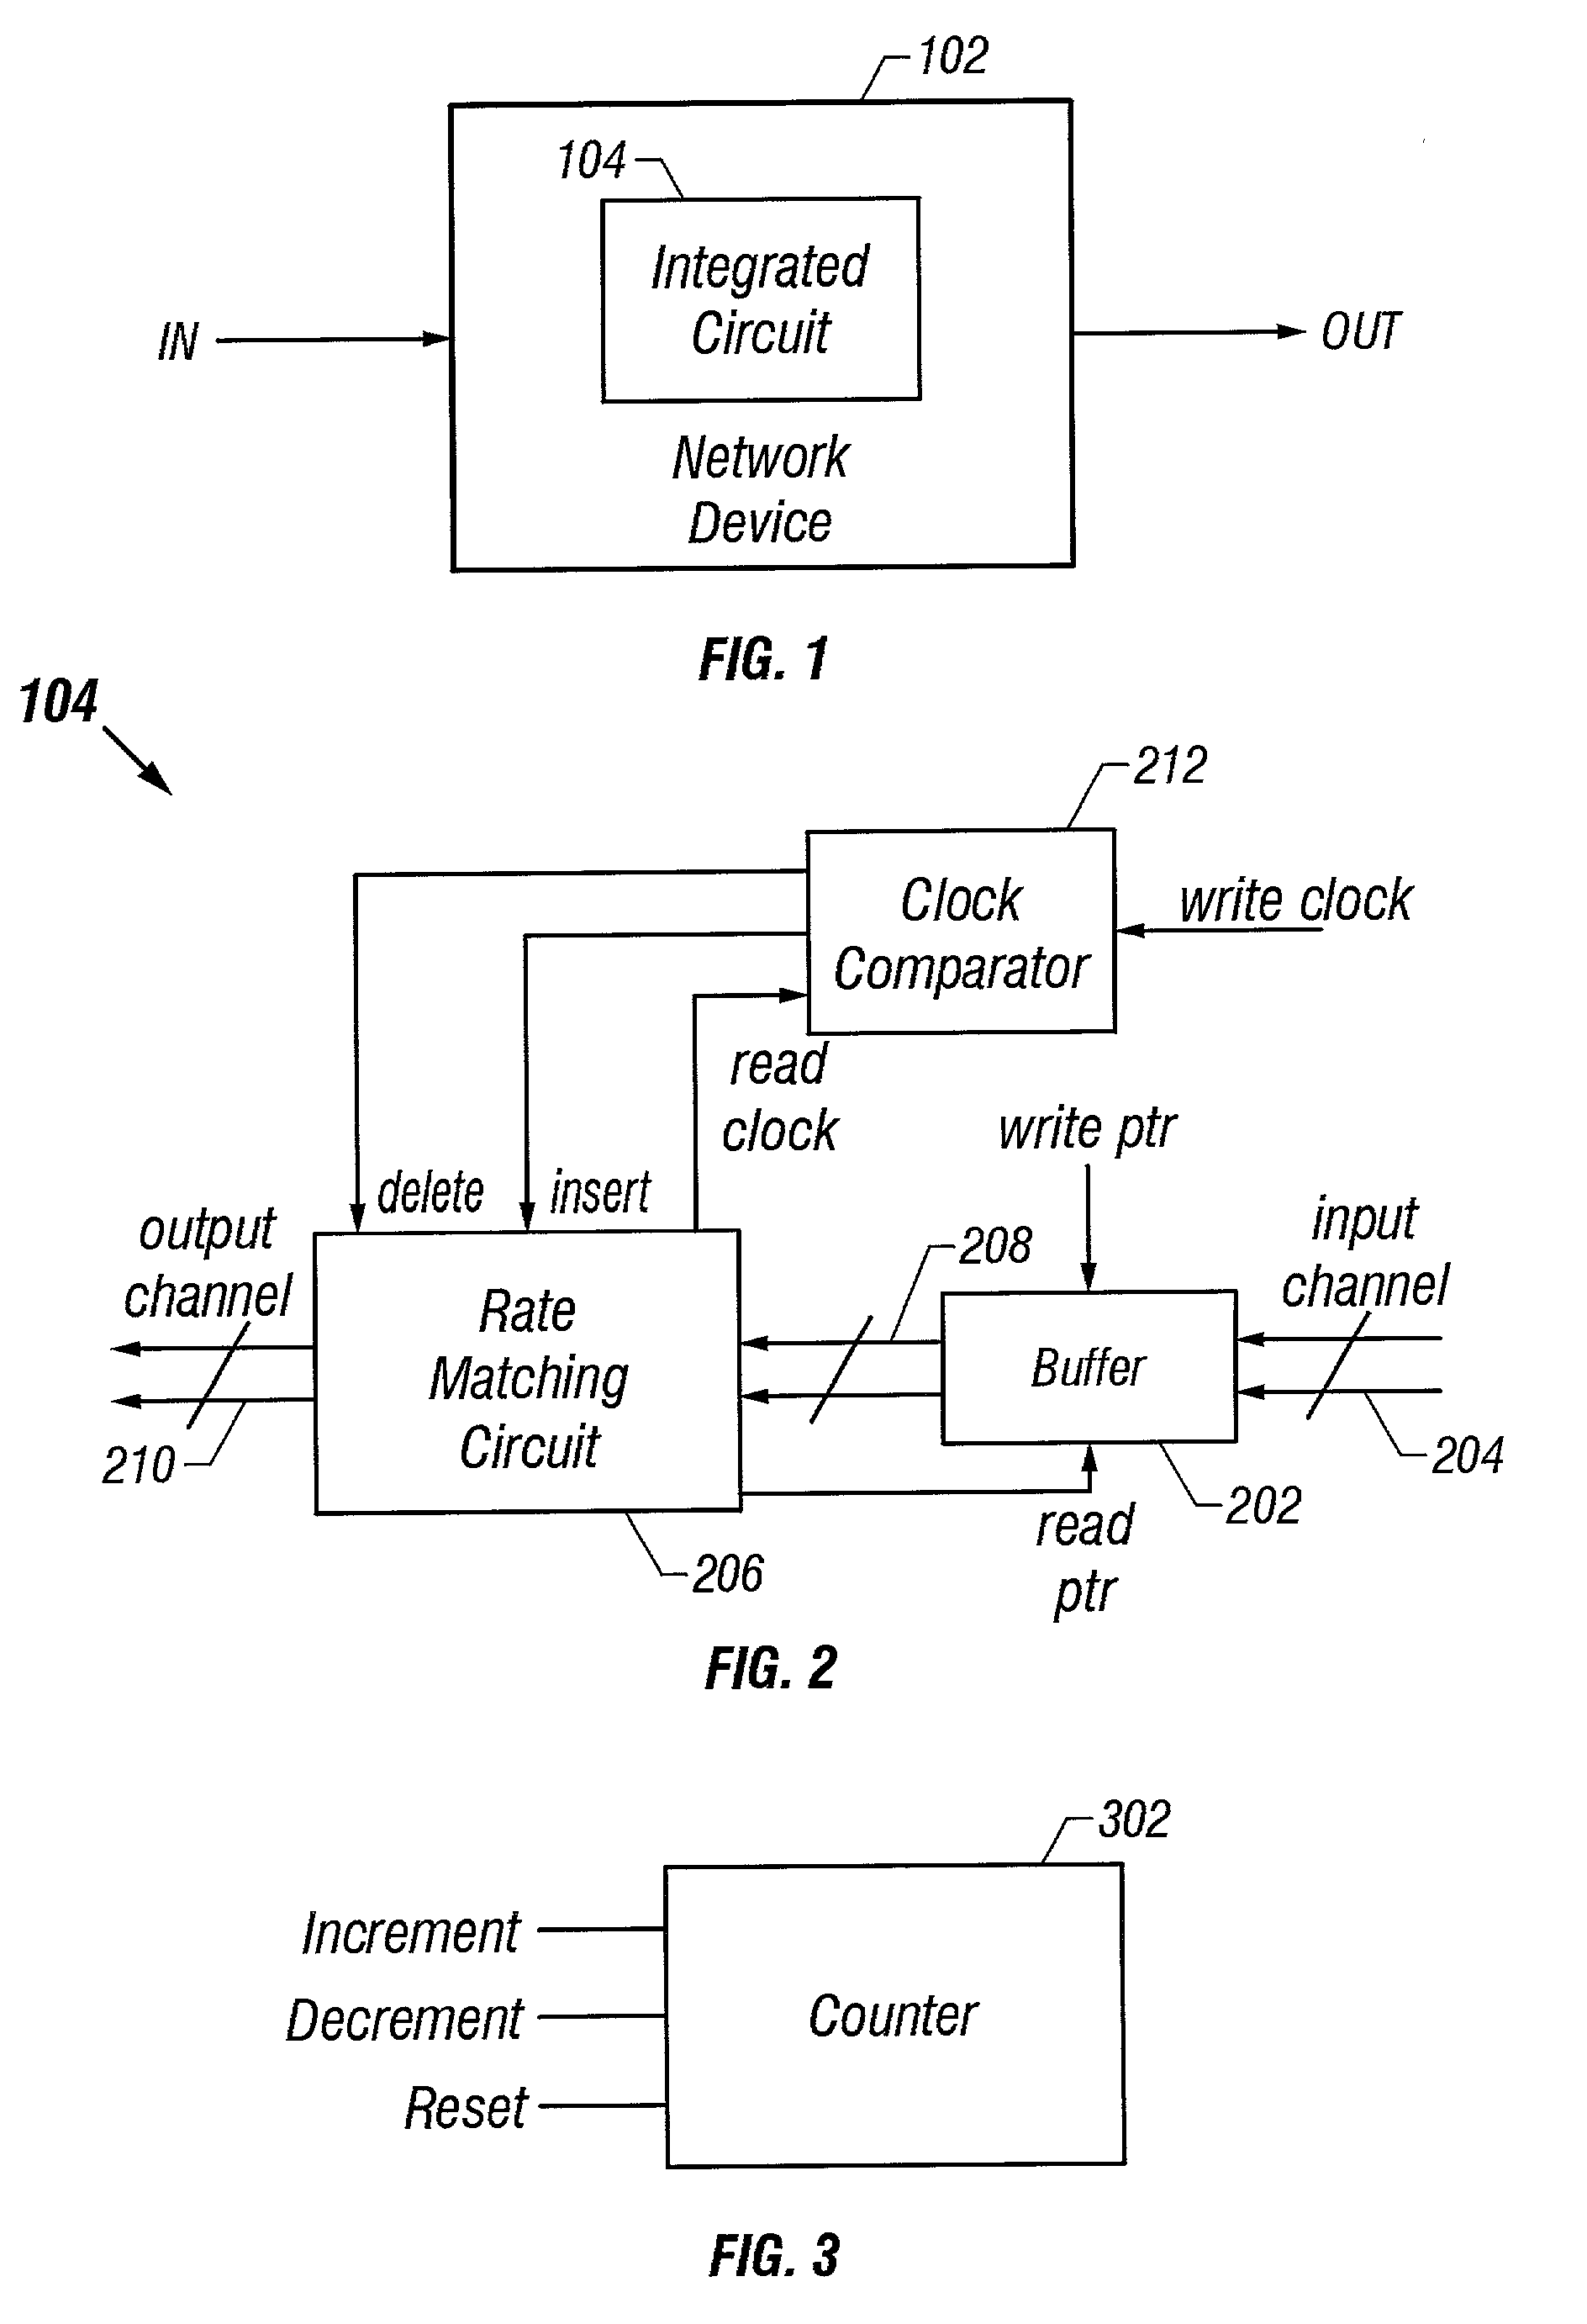 Method and apparatus for matching transmission rates across a single channel